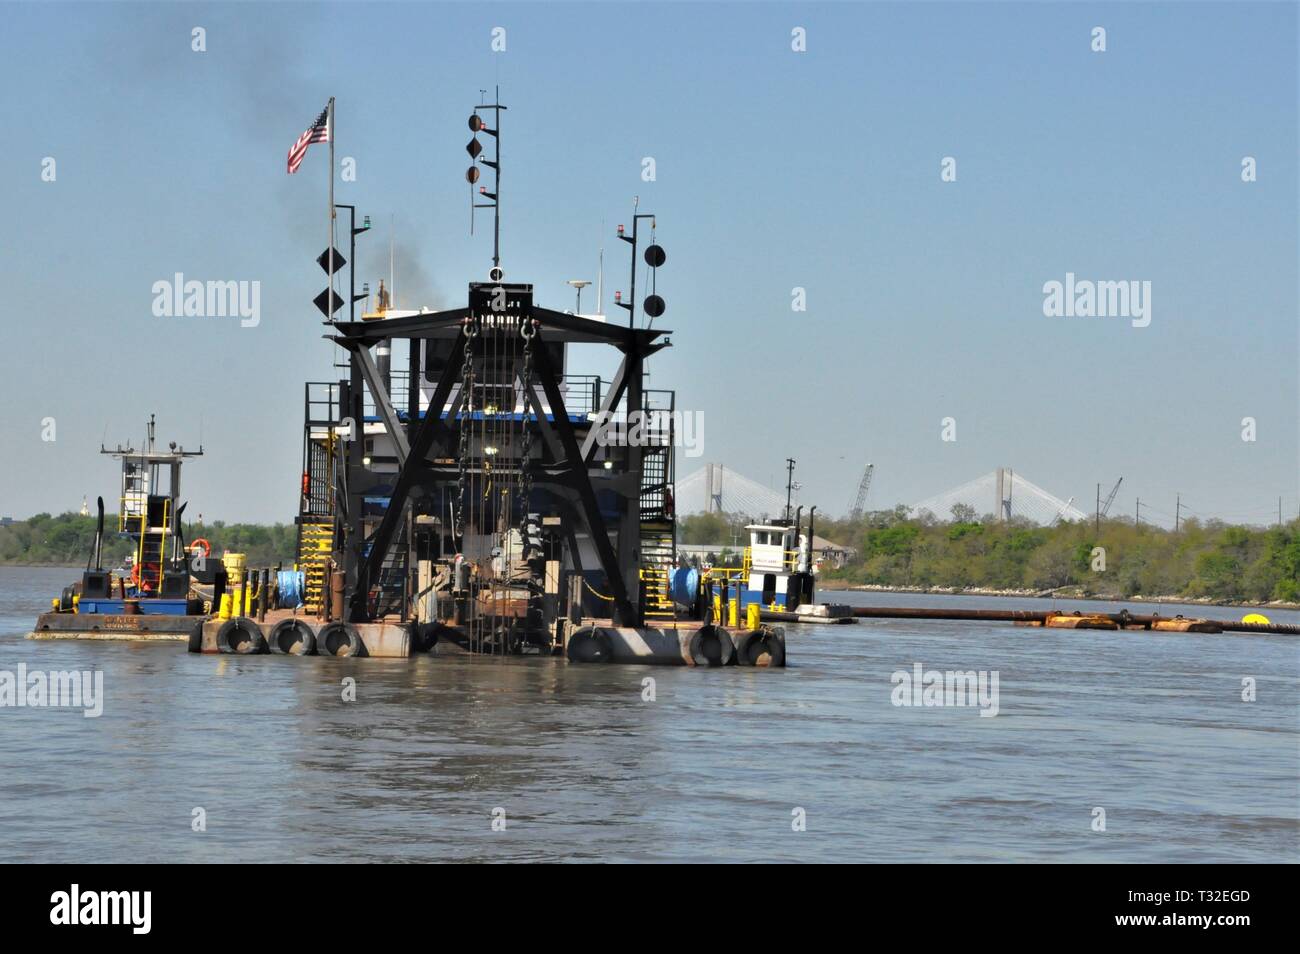 The dredge Hampton Roads with its submerged cutter head helps keep the Savannah River at its authorized depth of 42 feet. The U.S. Army Corps of Engineers, Savannah District oversees maintenance dredging in the Savannah Harbor. Stock Photo